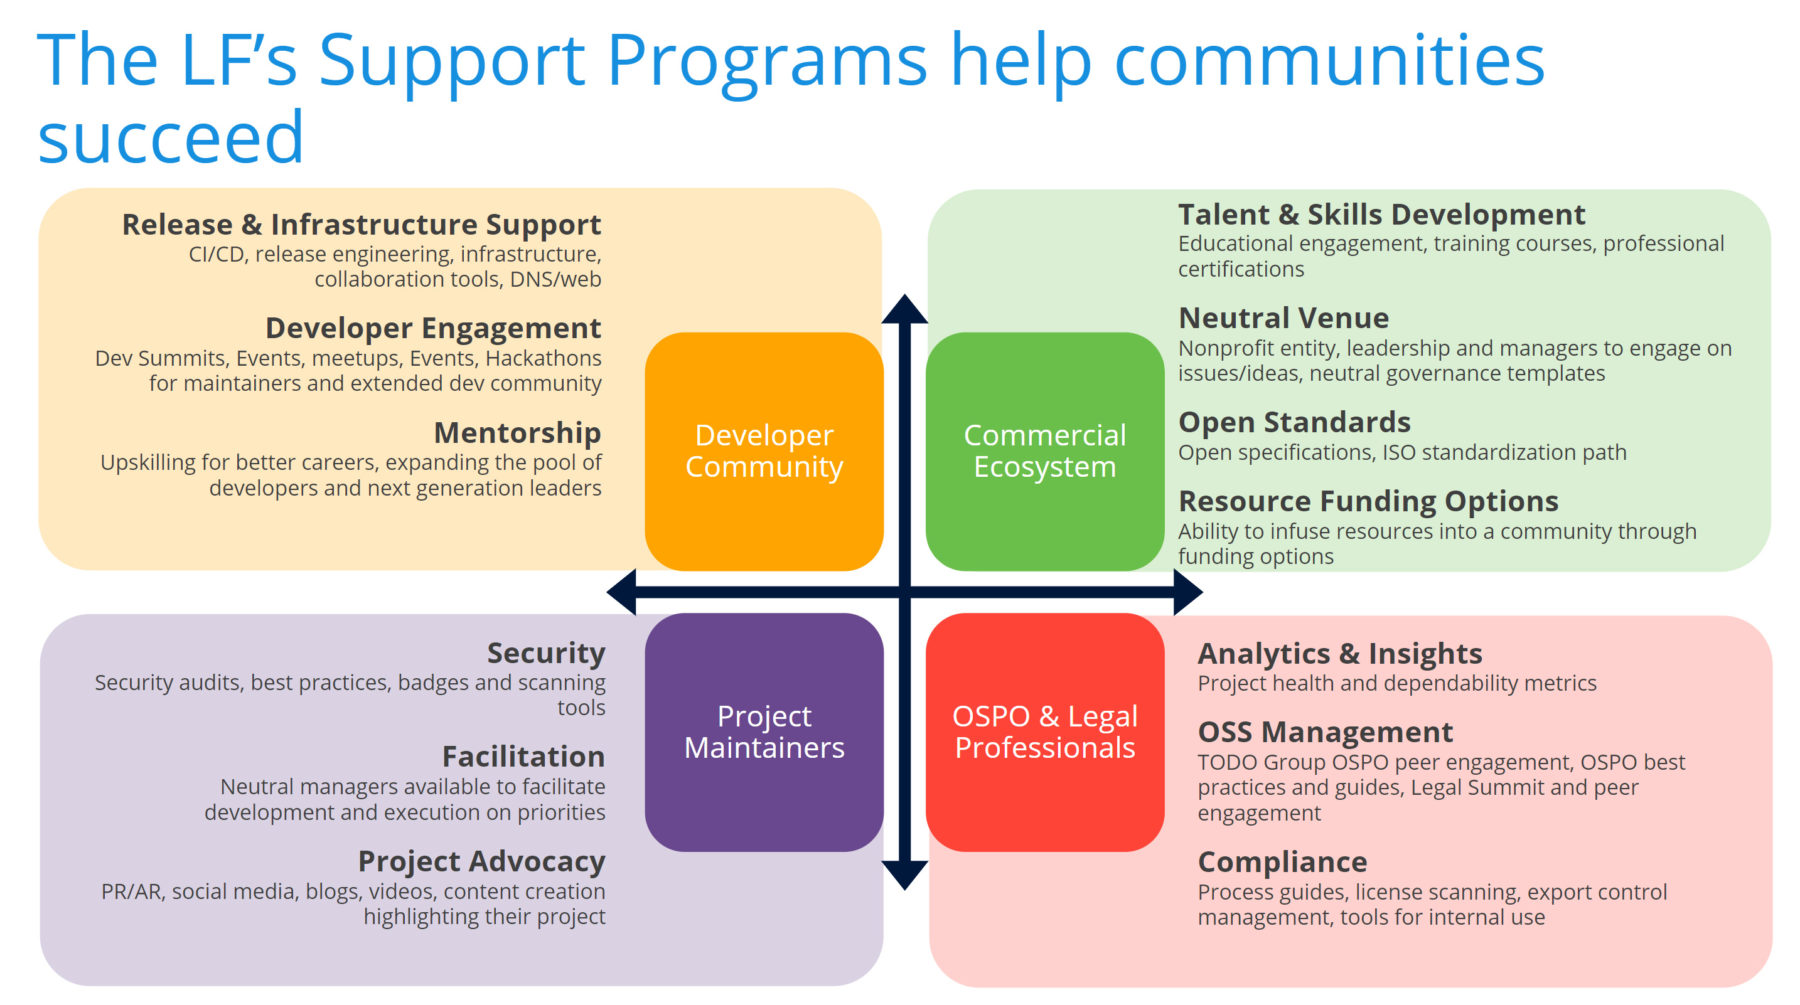 The portfolio of support programs that the Linux Foundation has developed to help its project communities